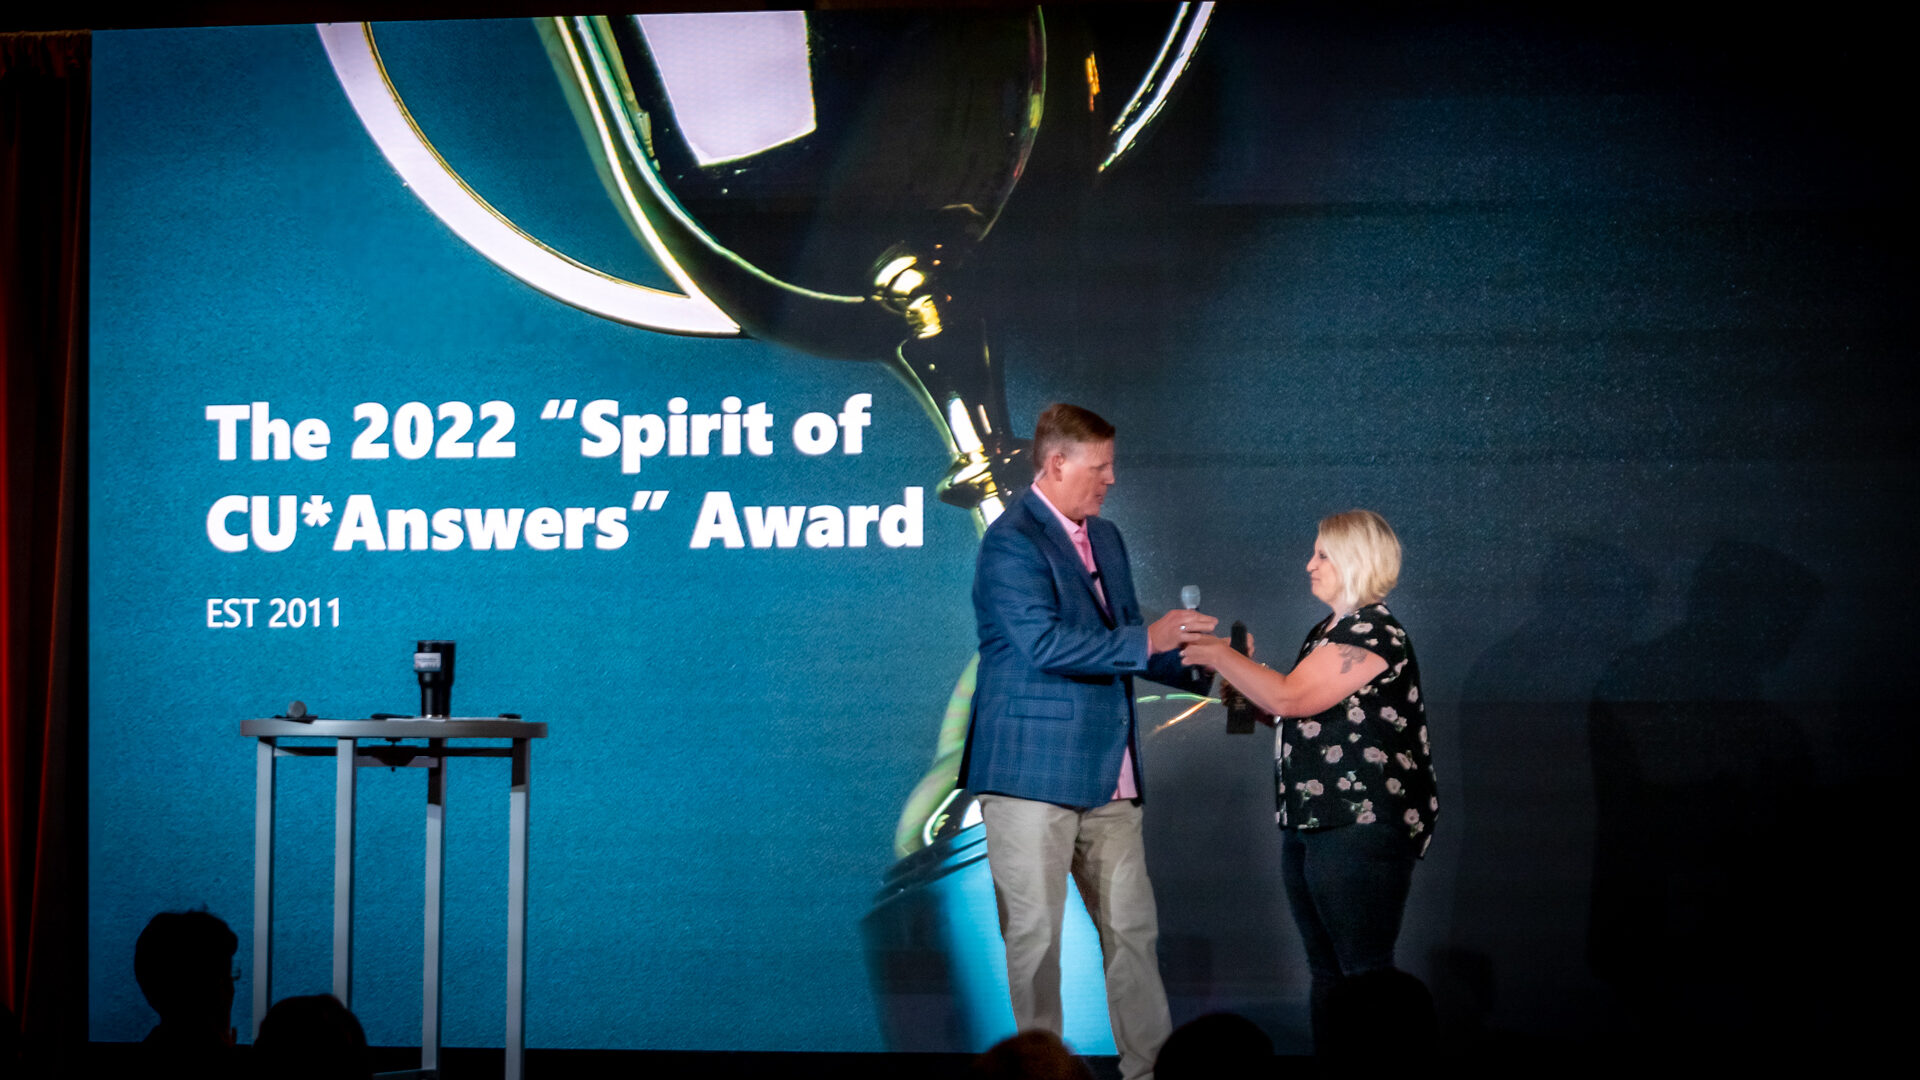 CU*Answers CEO Geoff Johnson presents the "Spirit of CU*Answers" Award to Vizo Financial's Charnell Etzweiler.